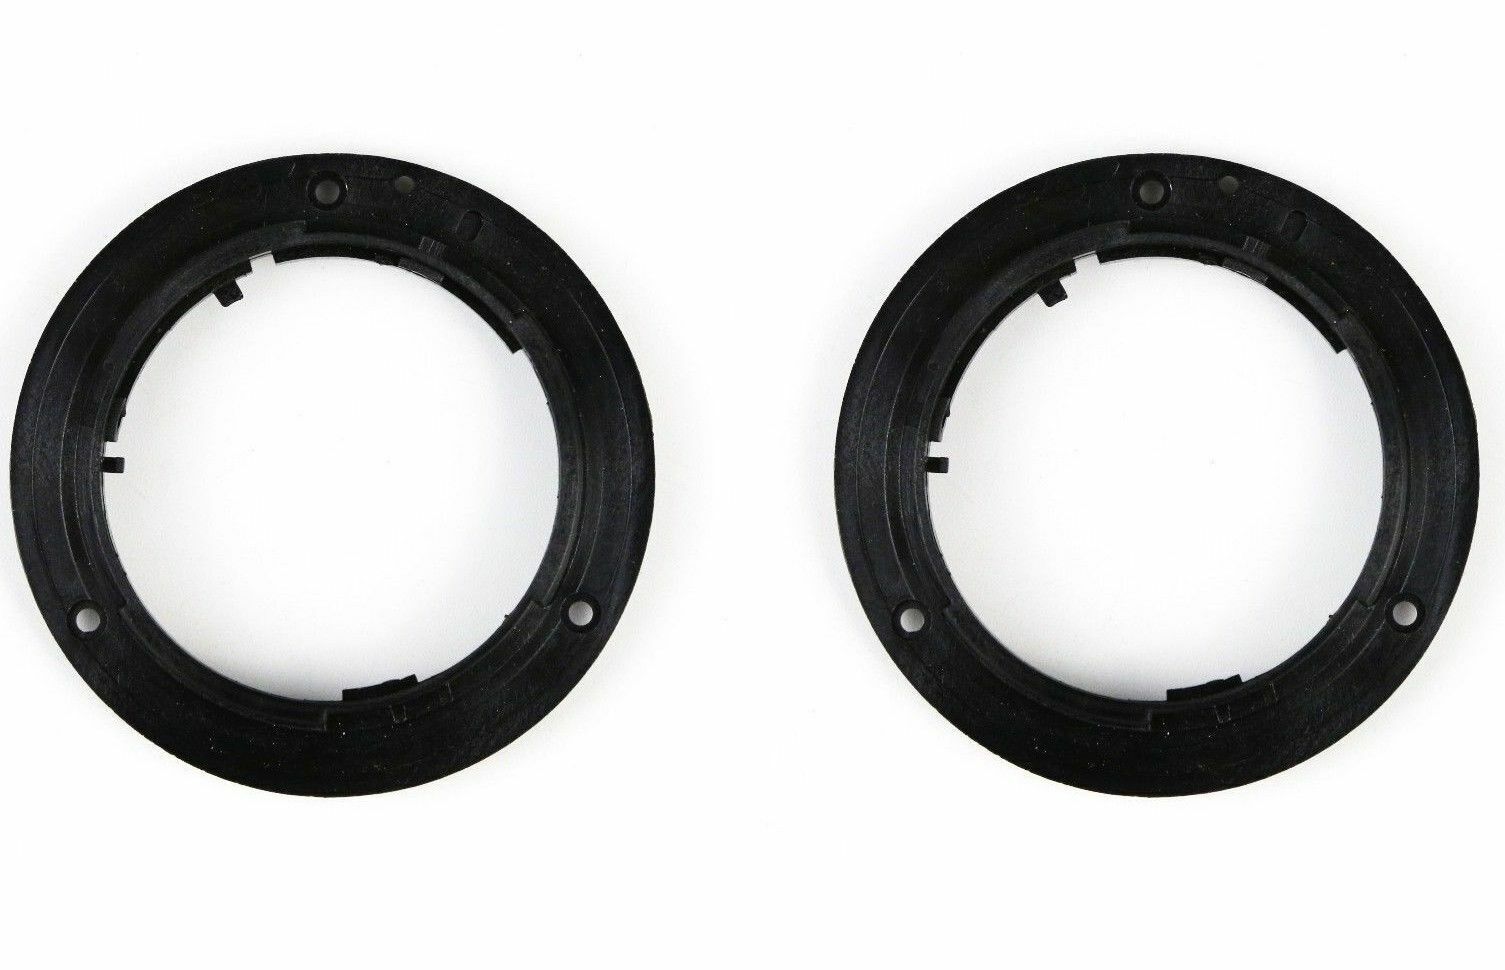 2x Replacement Lens Bayonet Mount Ring Part for NIKON 18-105mm 18-135mm 18-55mm Unbranded/Generic Does not apply